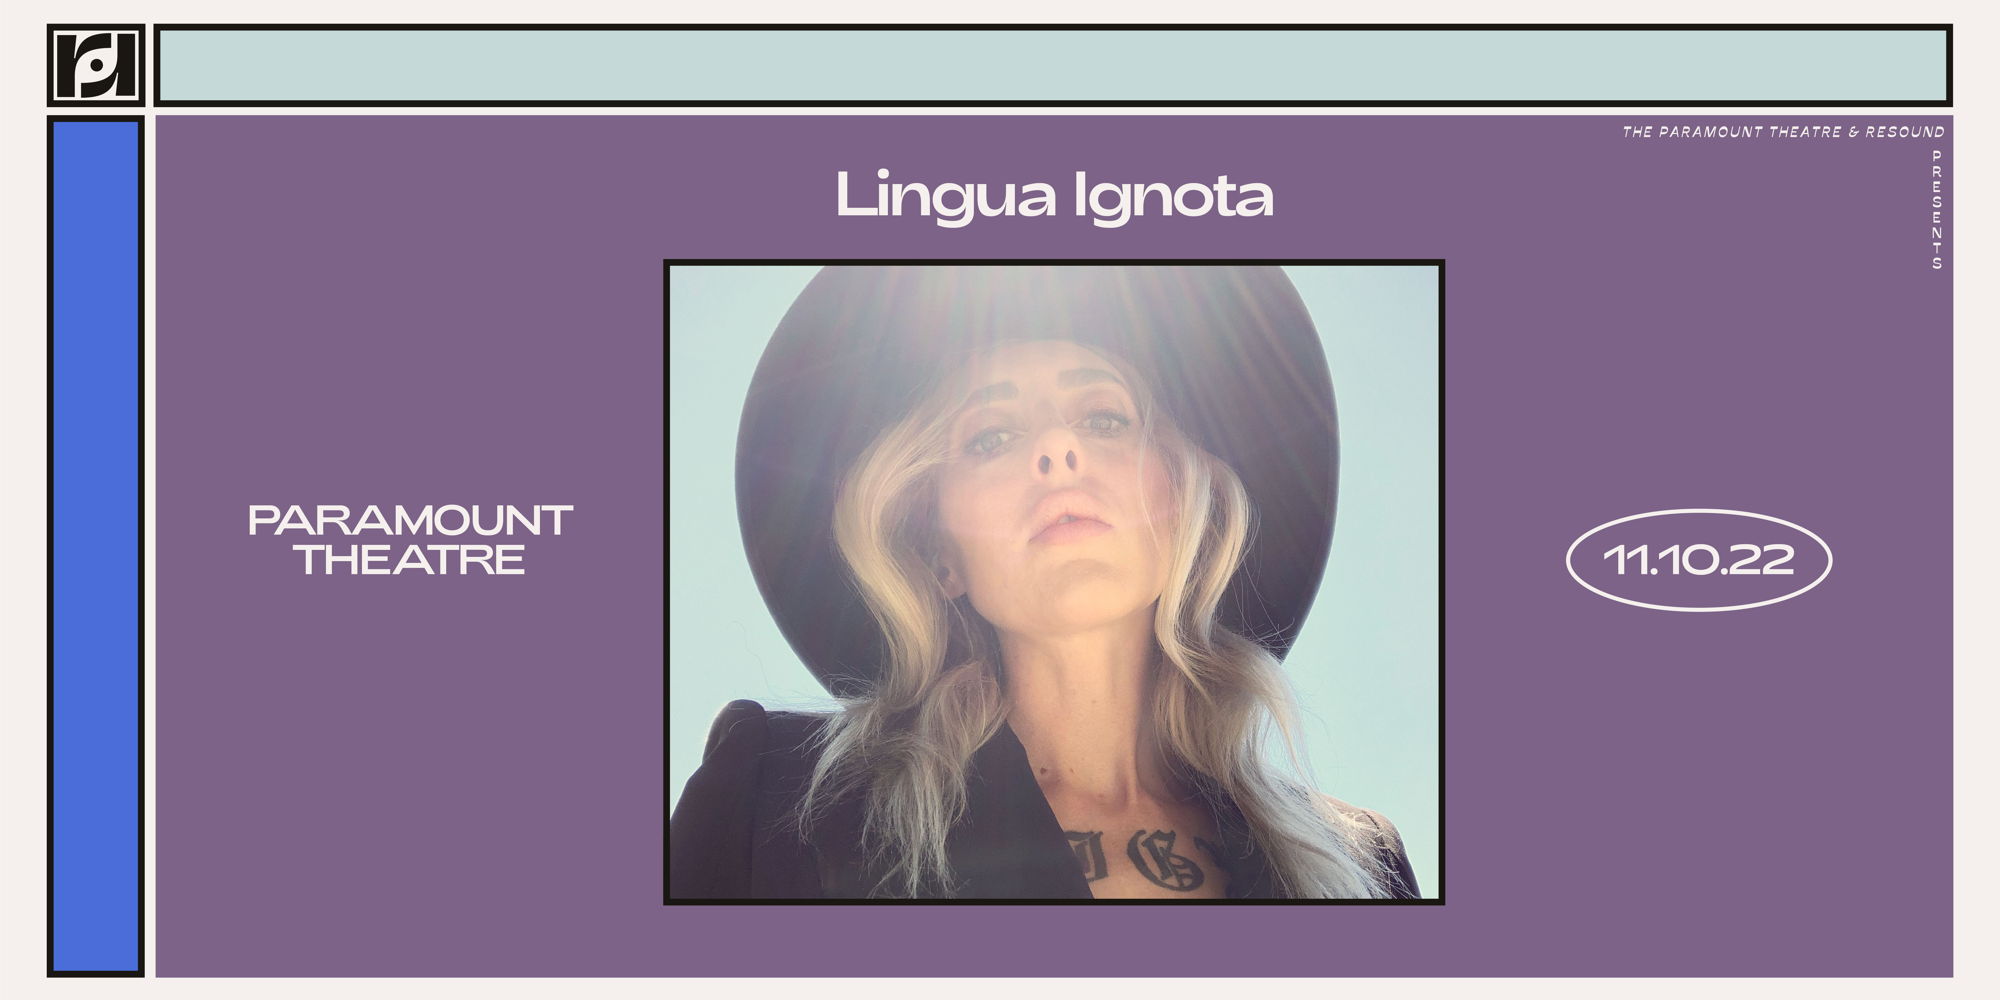 The Paramount Theatre + Resound Presents: An Evening With Lingua Ignota on 11/10 promotional image